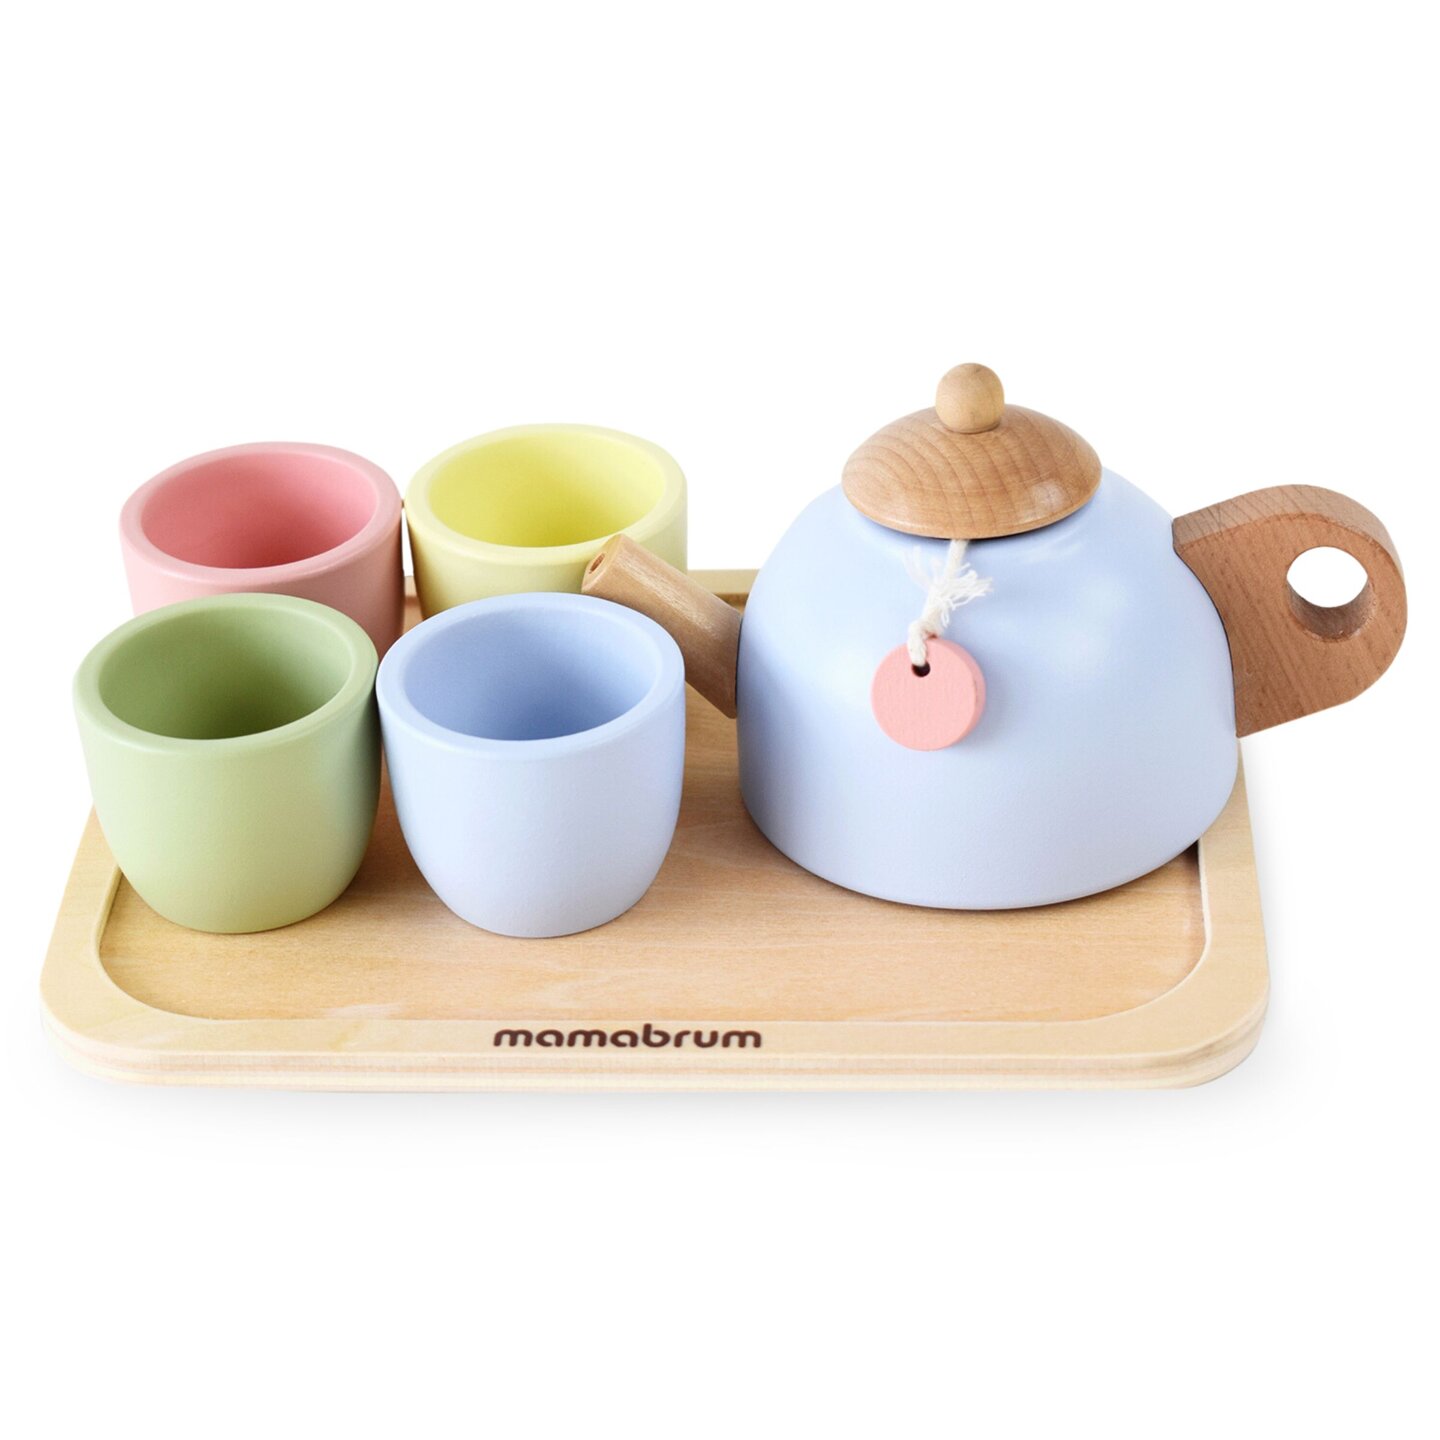 Wooden tea set with tray - 7 items